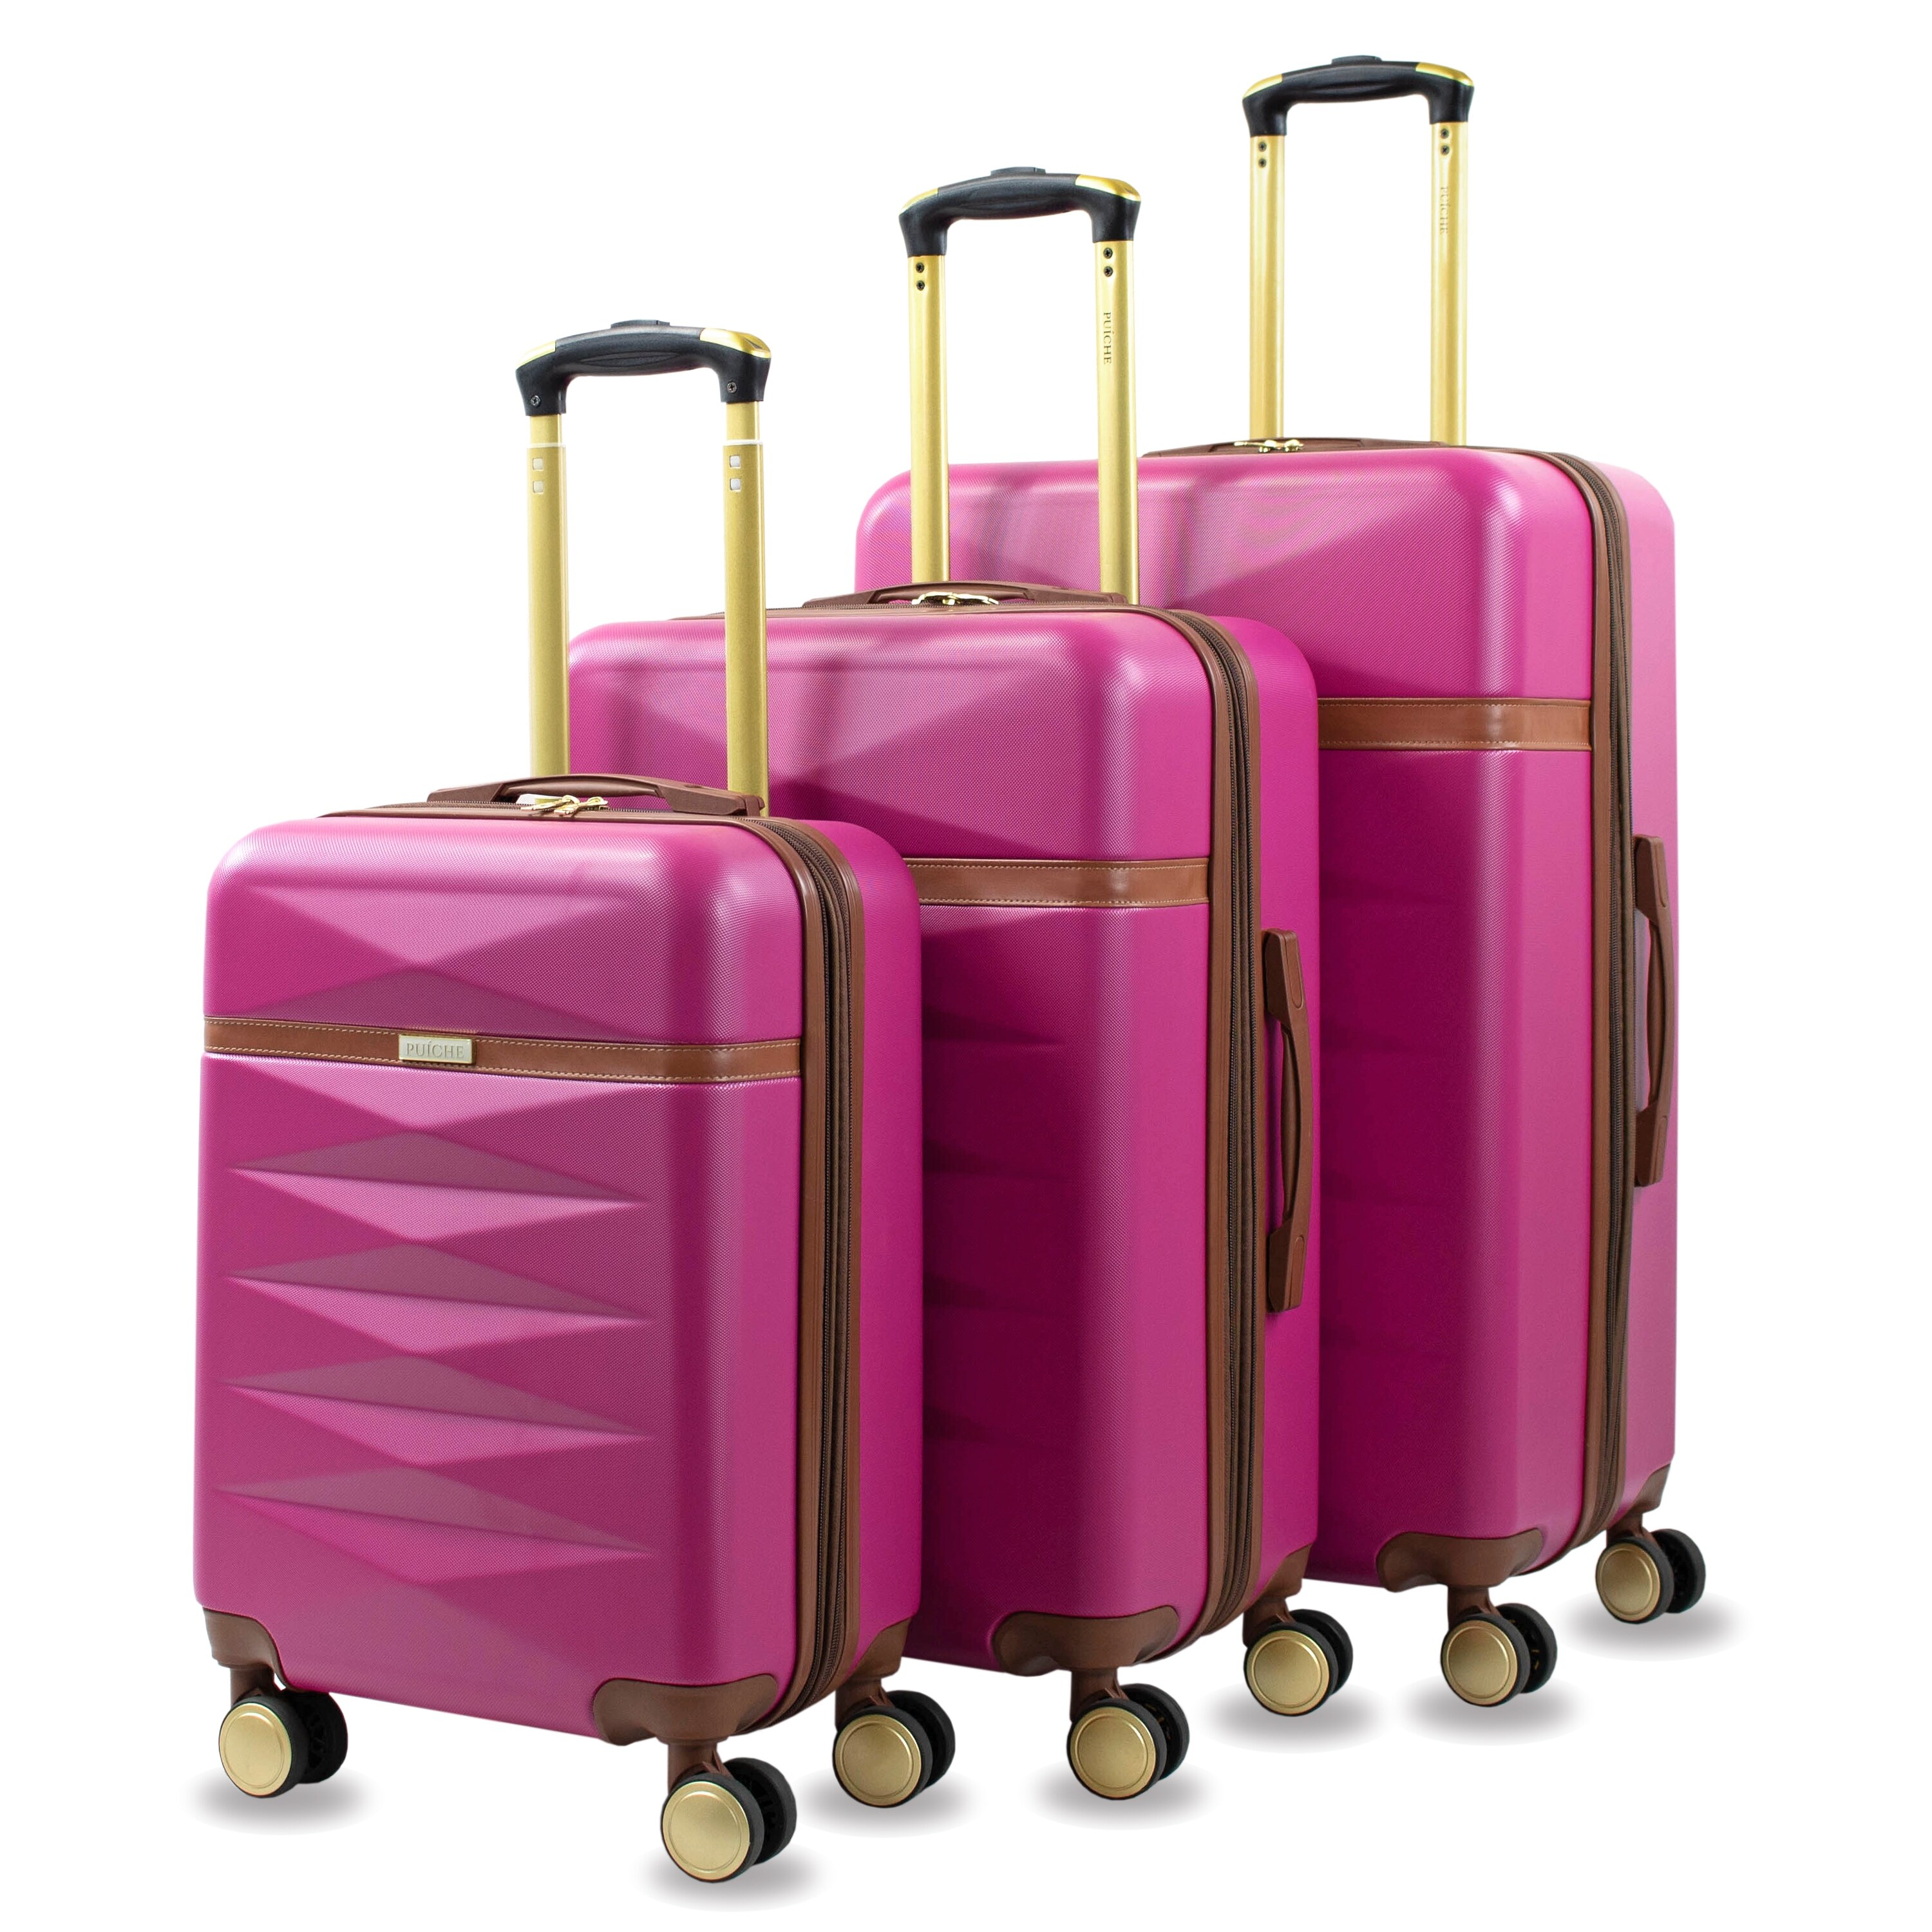 Denco 2-Piece Deluxe Pink Luggage Set Includes 21 Hardcase Spinner and 19 Laptop Backpack 